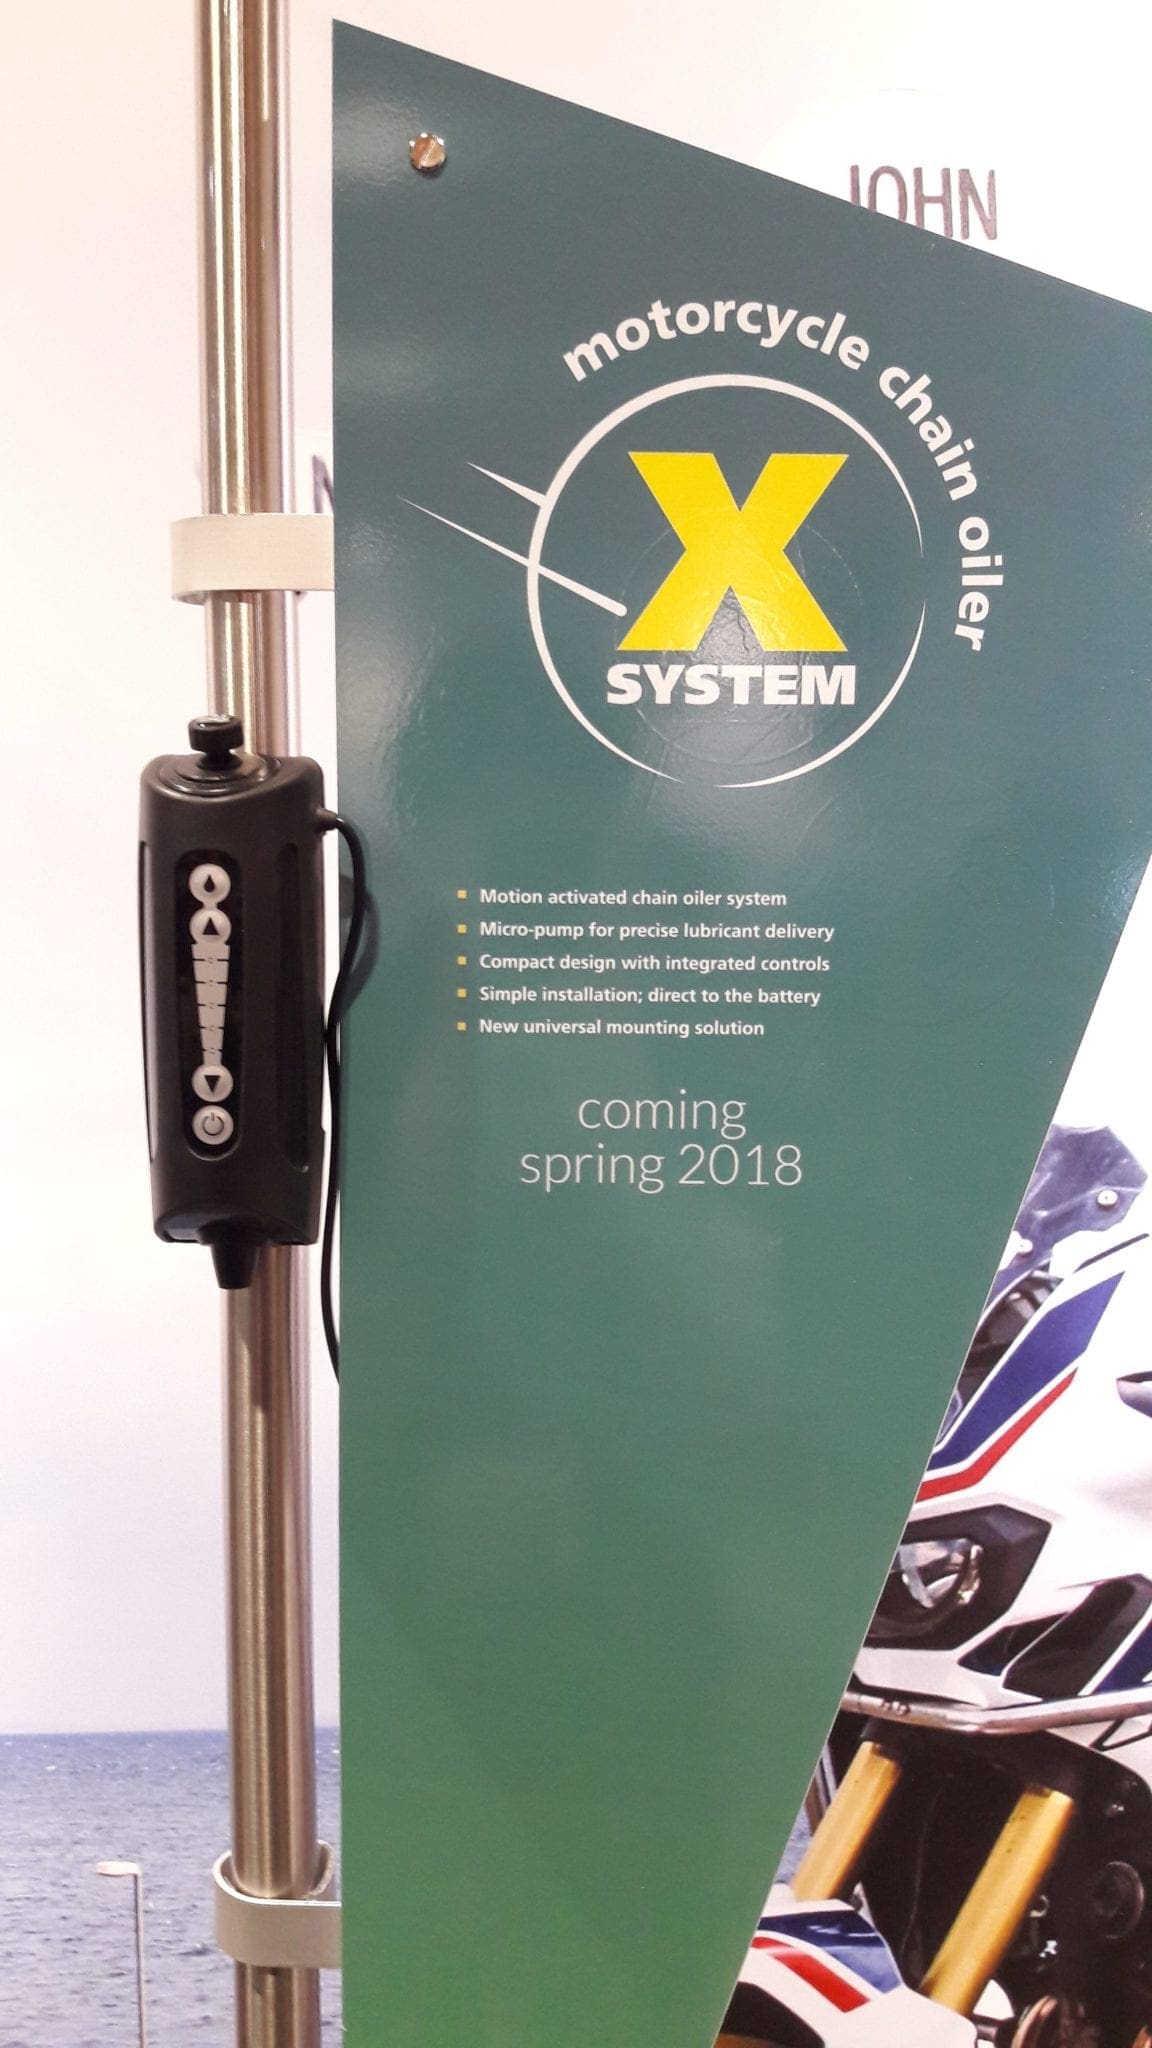 Scottoiler unveil its new xSystem automatic oiler at Motorcycle Live